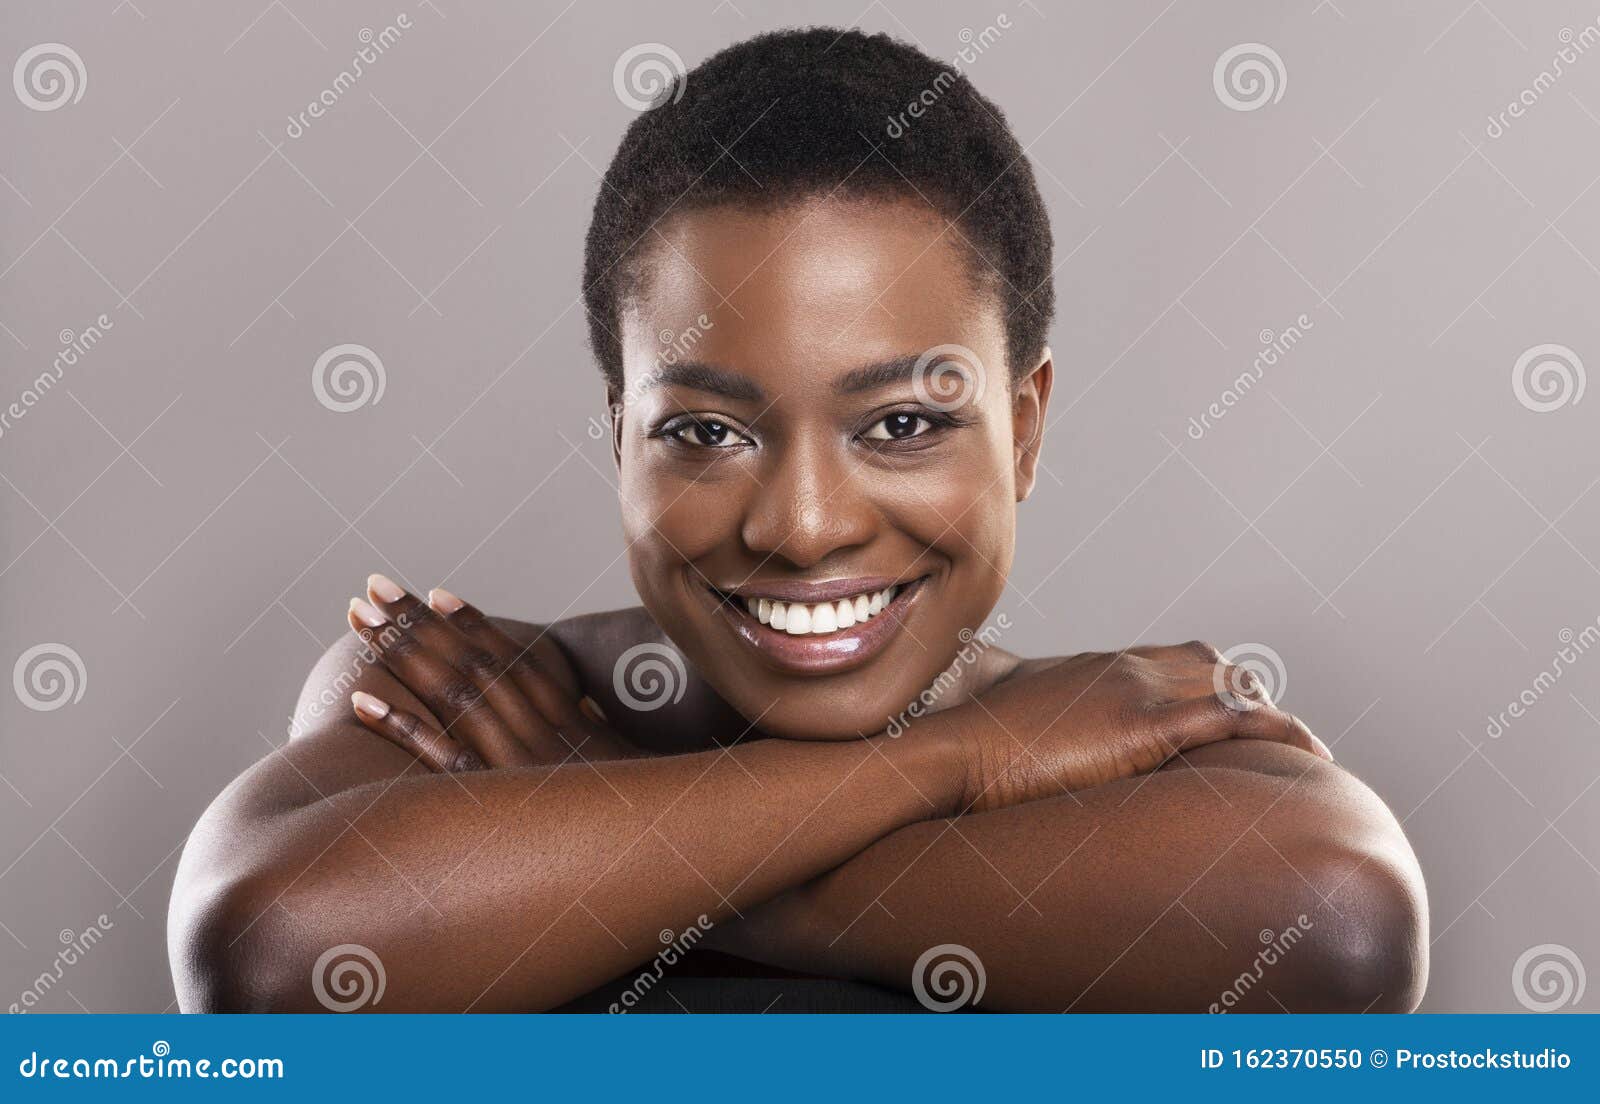 Nude Pictures Of Beautiful Black Women